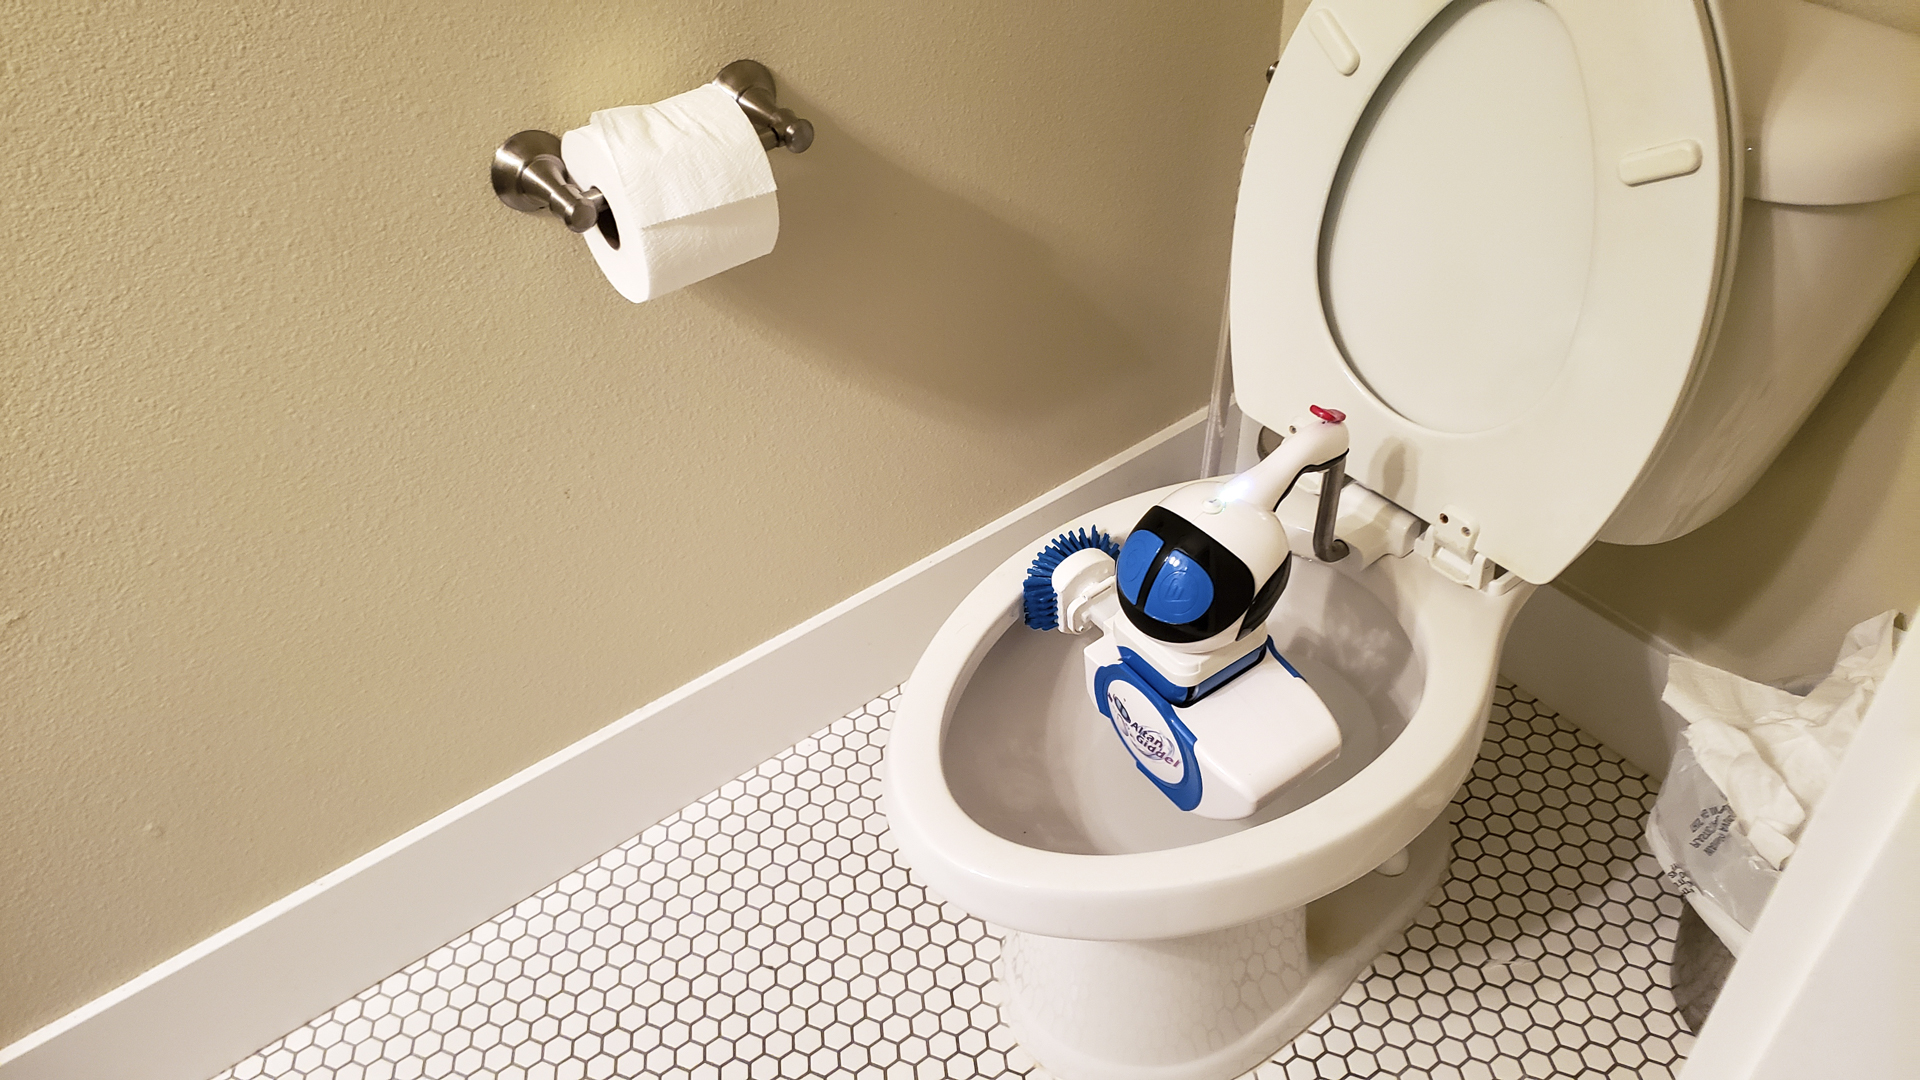 Do We Really Need A Toilet-Cleaning Robot? I Took It For A Scrub To Find  Out